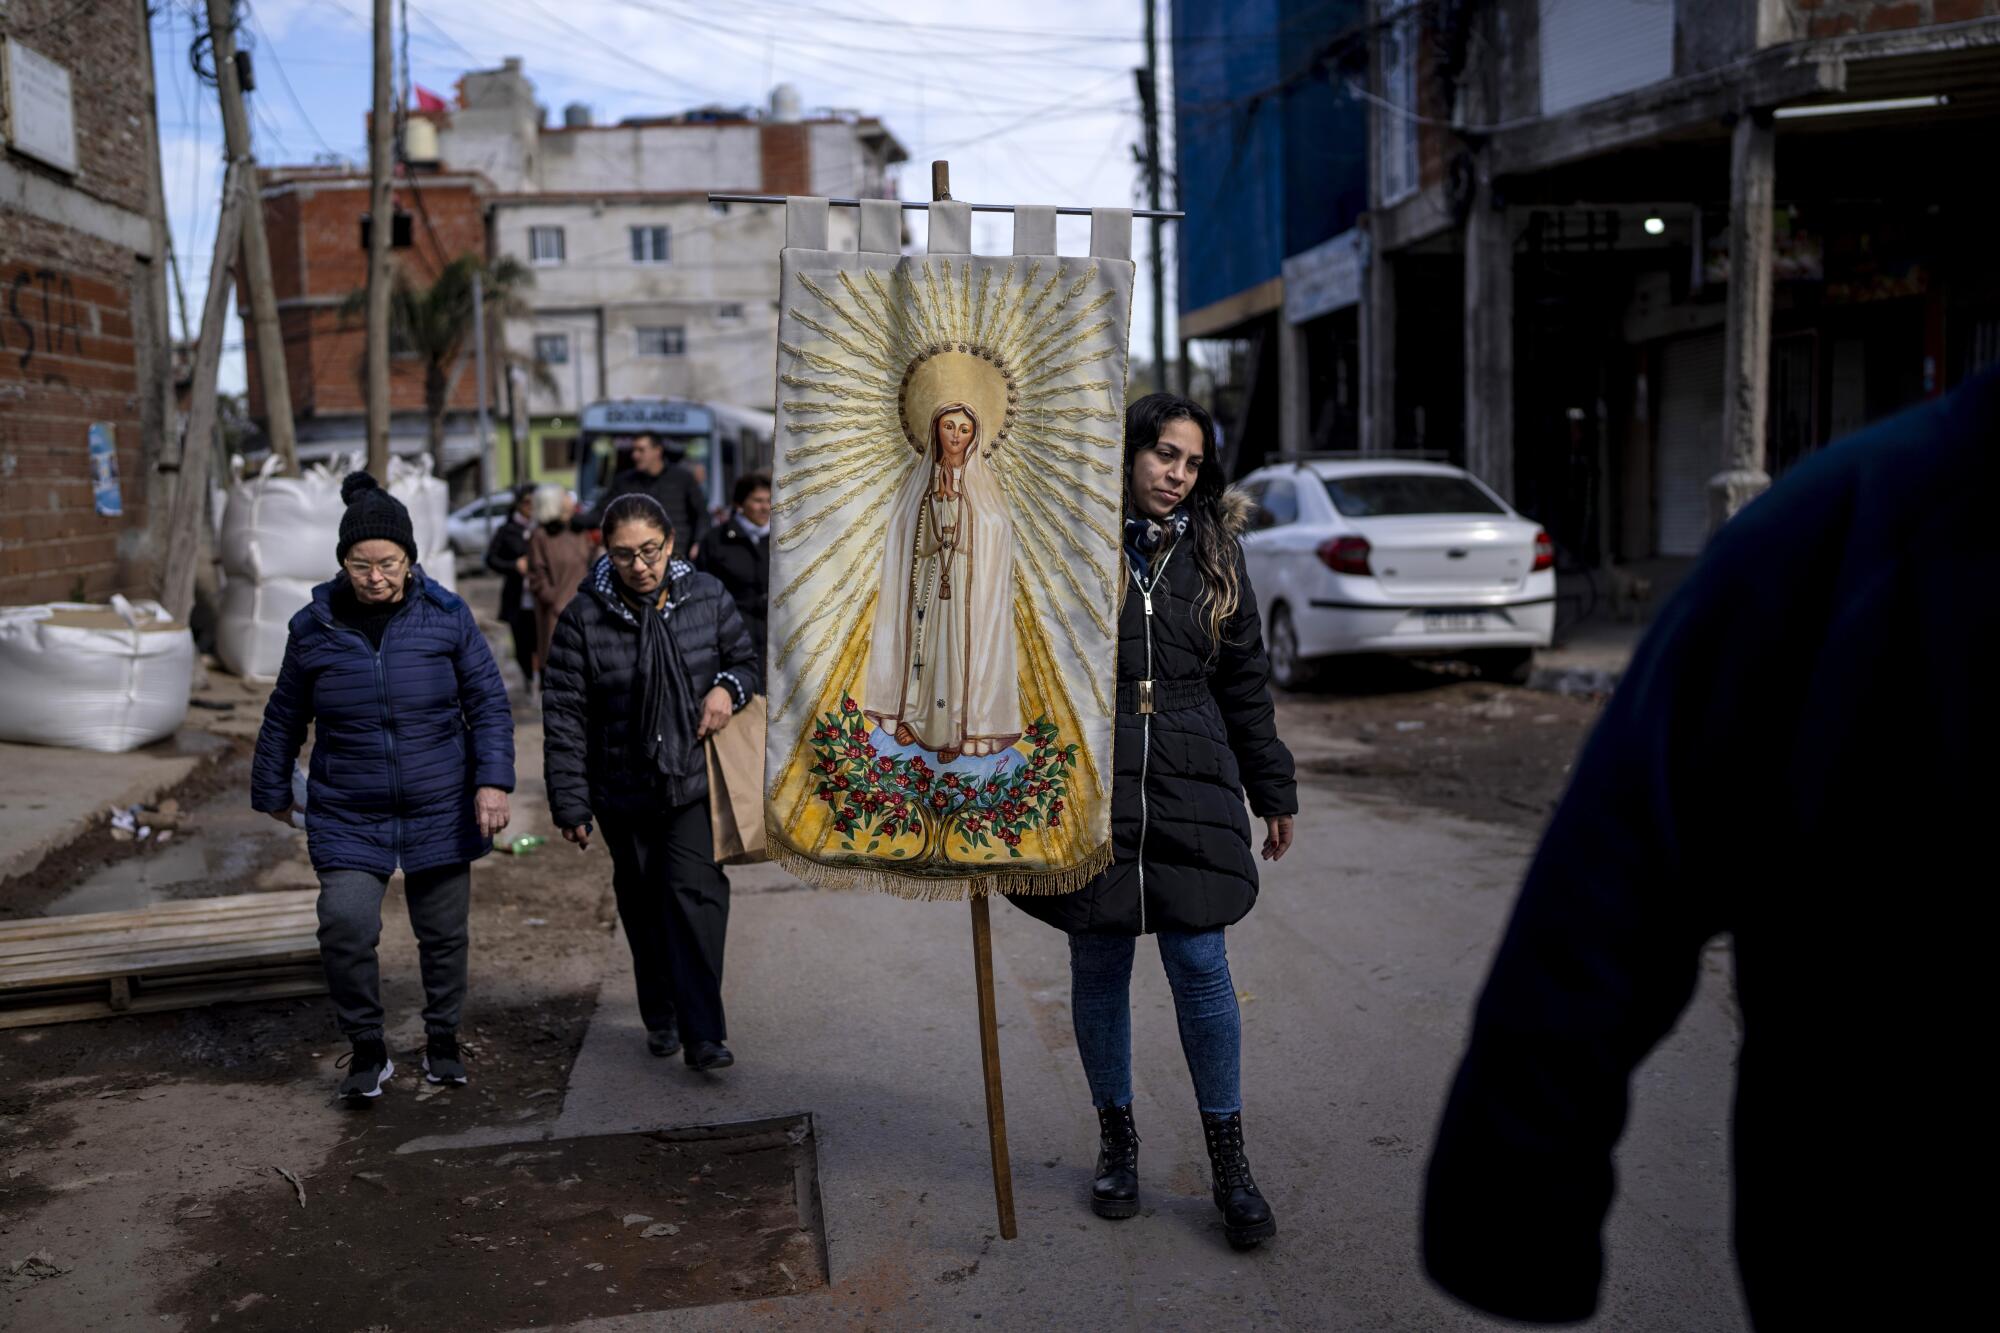 People walk down a street, on of them carrying an image of a religious icon